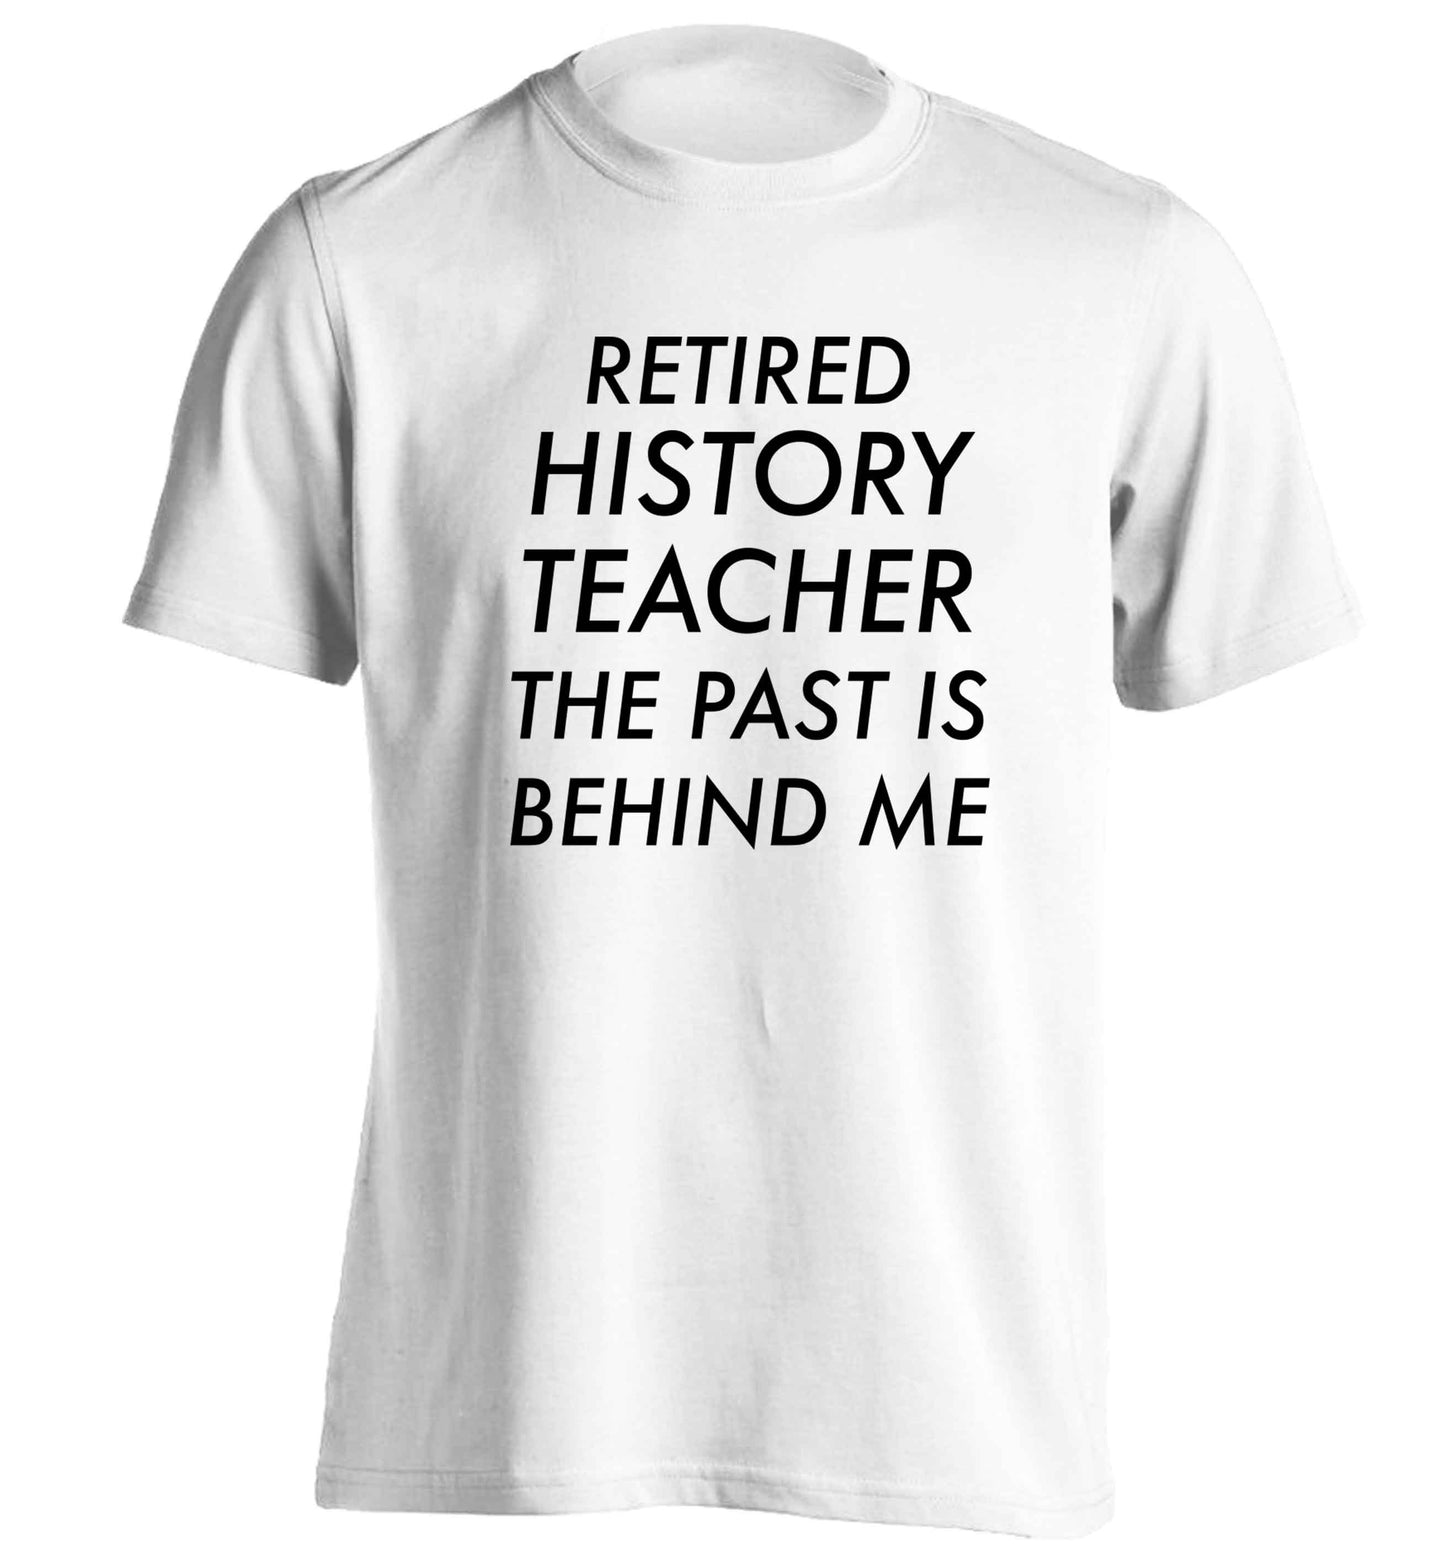 Retired history teacher the past is behind me adults unisex white Tshirt 2XL